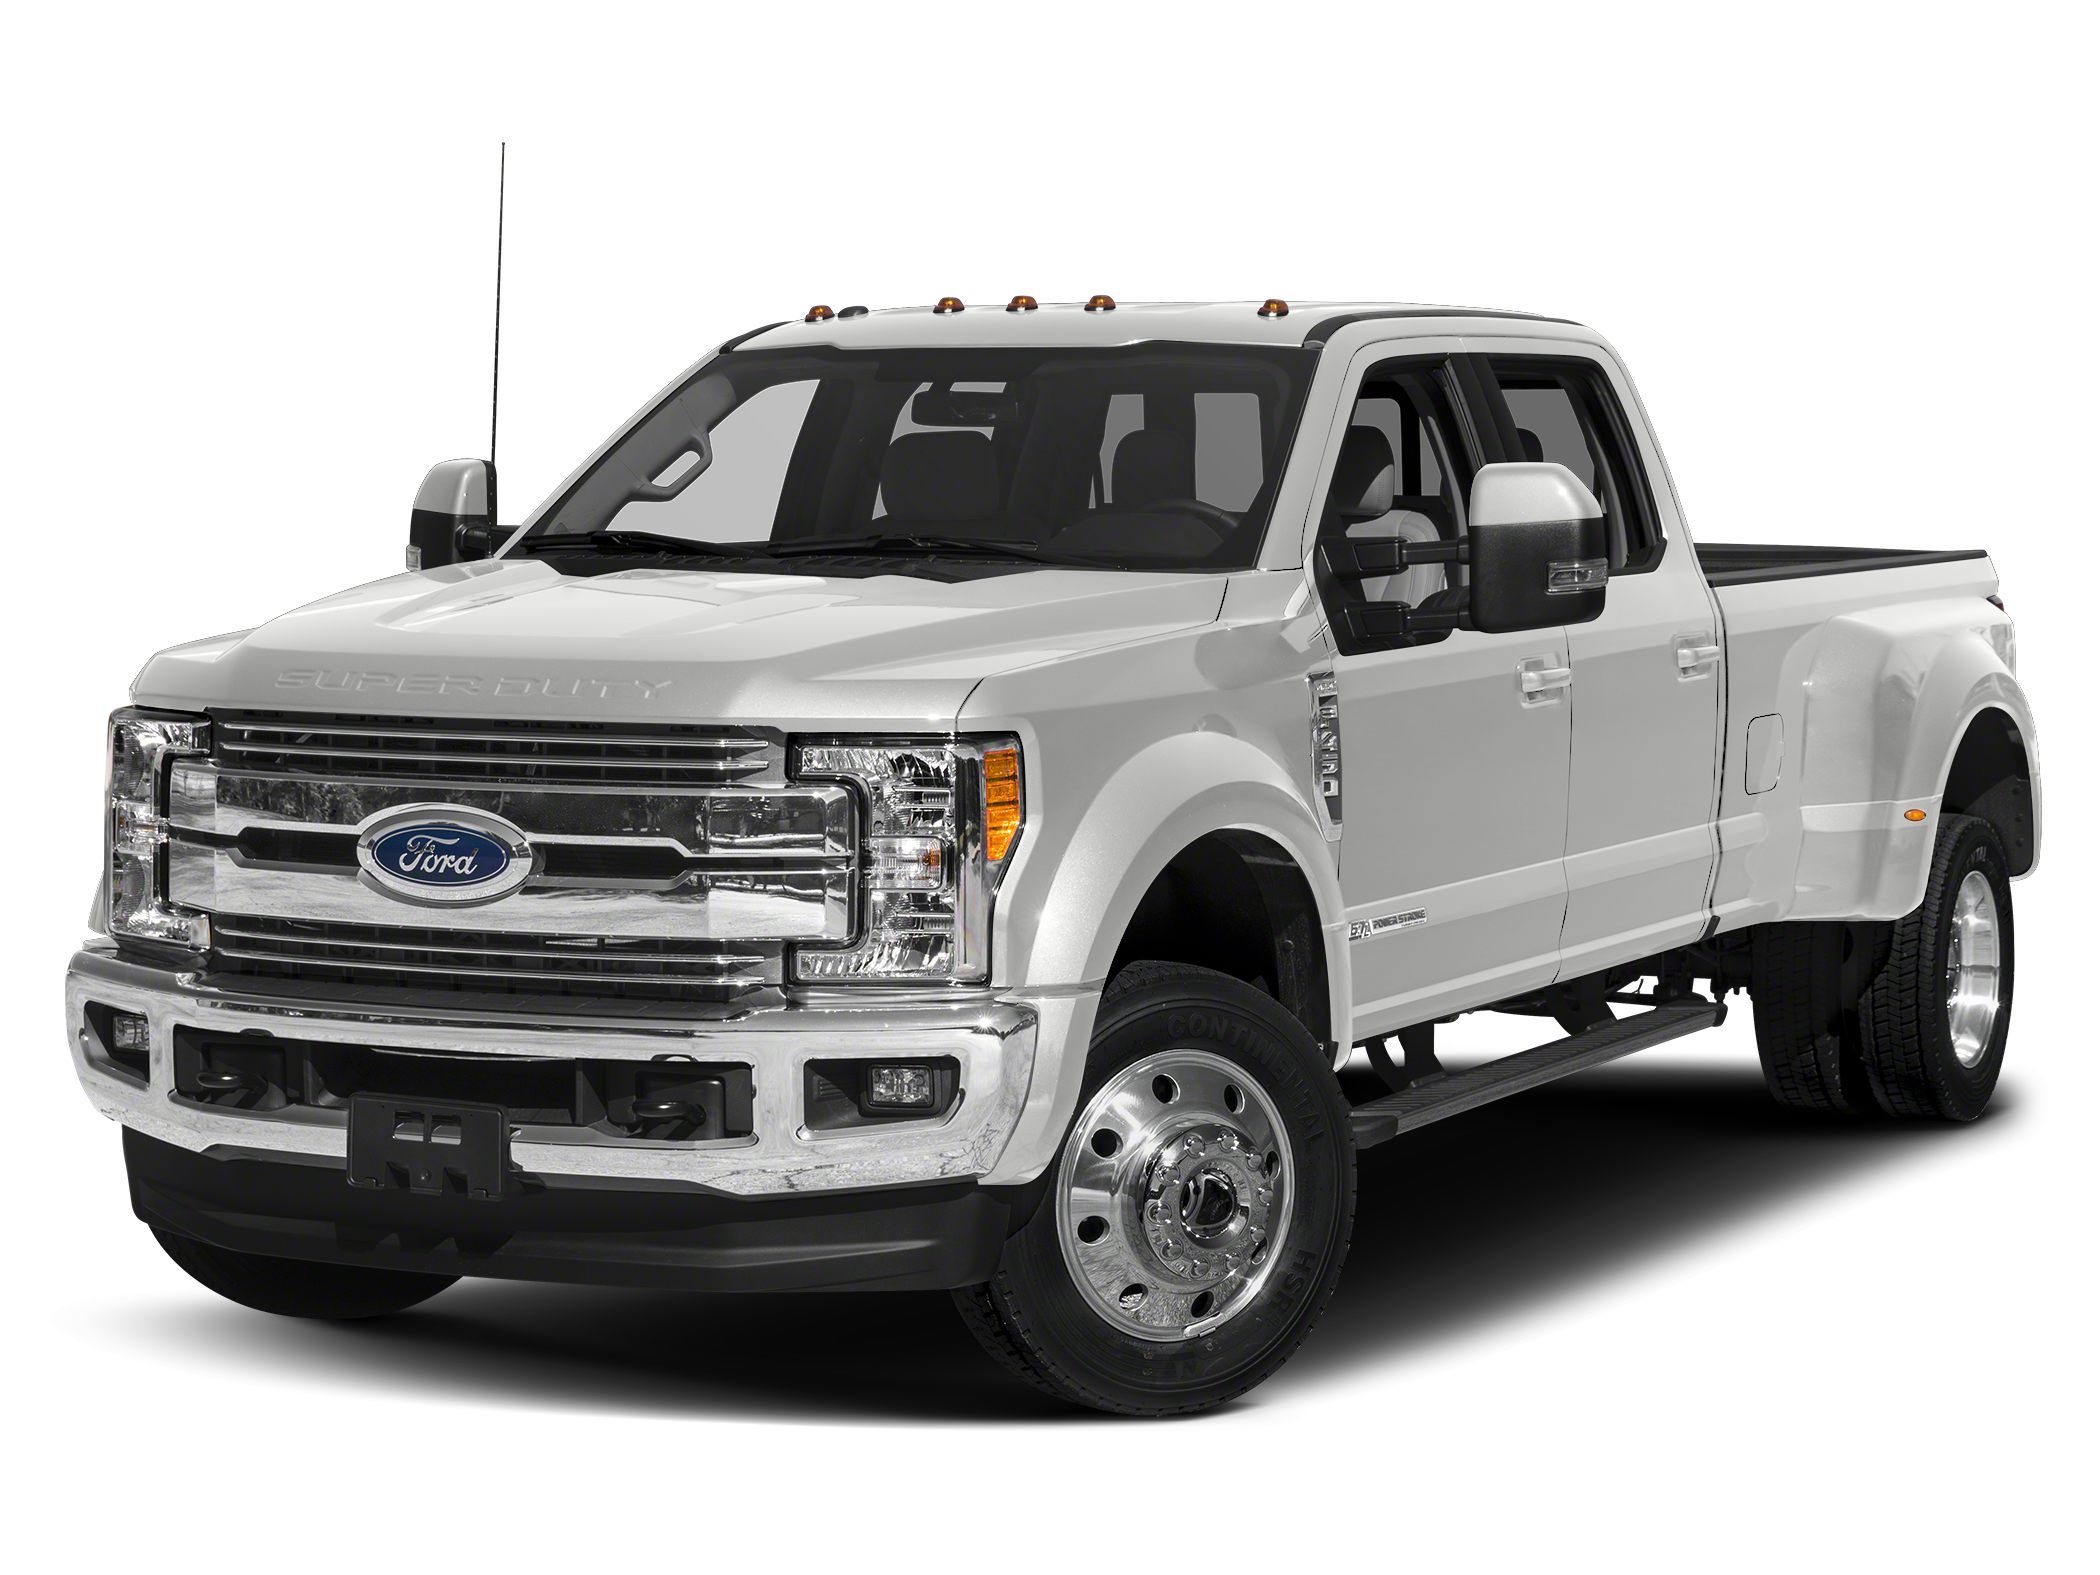 2019 Ford F-450 Crew Cab Long Bed Truck 